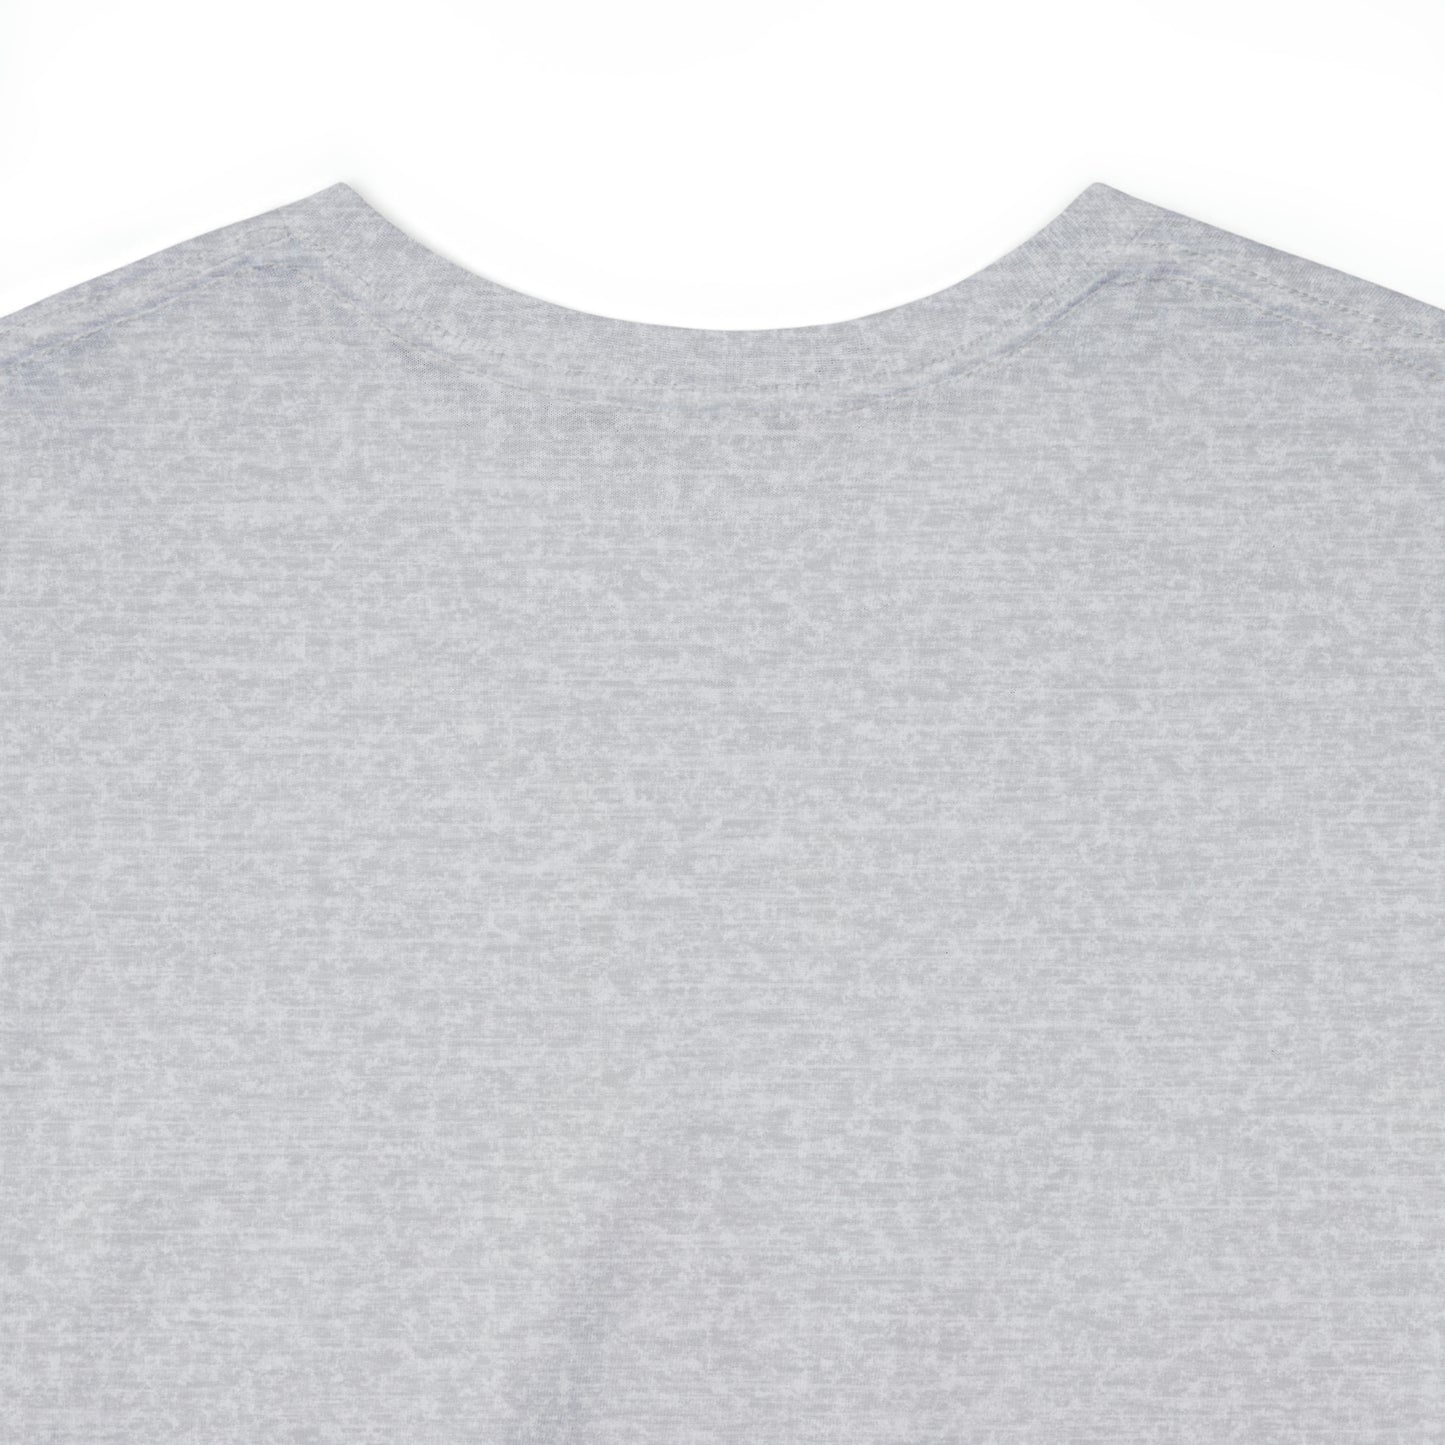 Close up of the back of the neck of the grey t-shirt